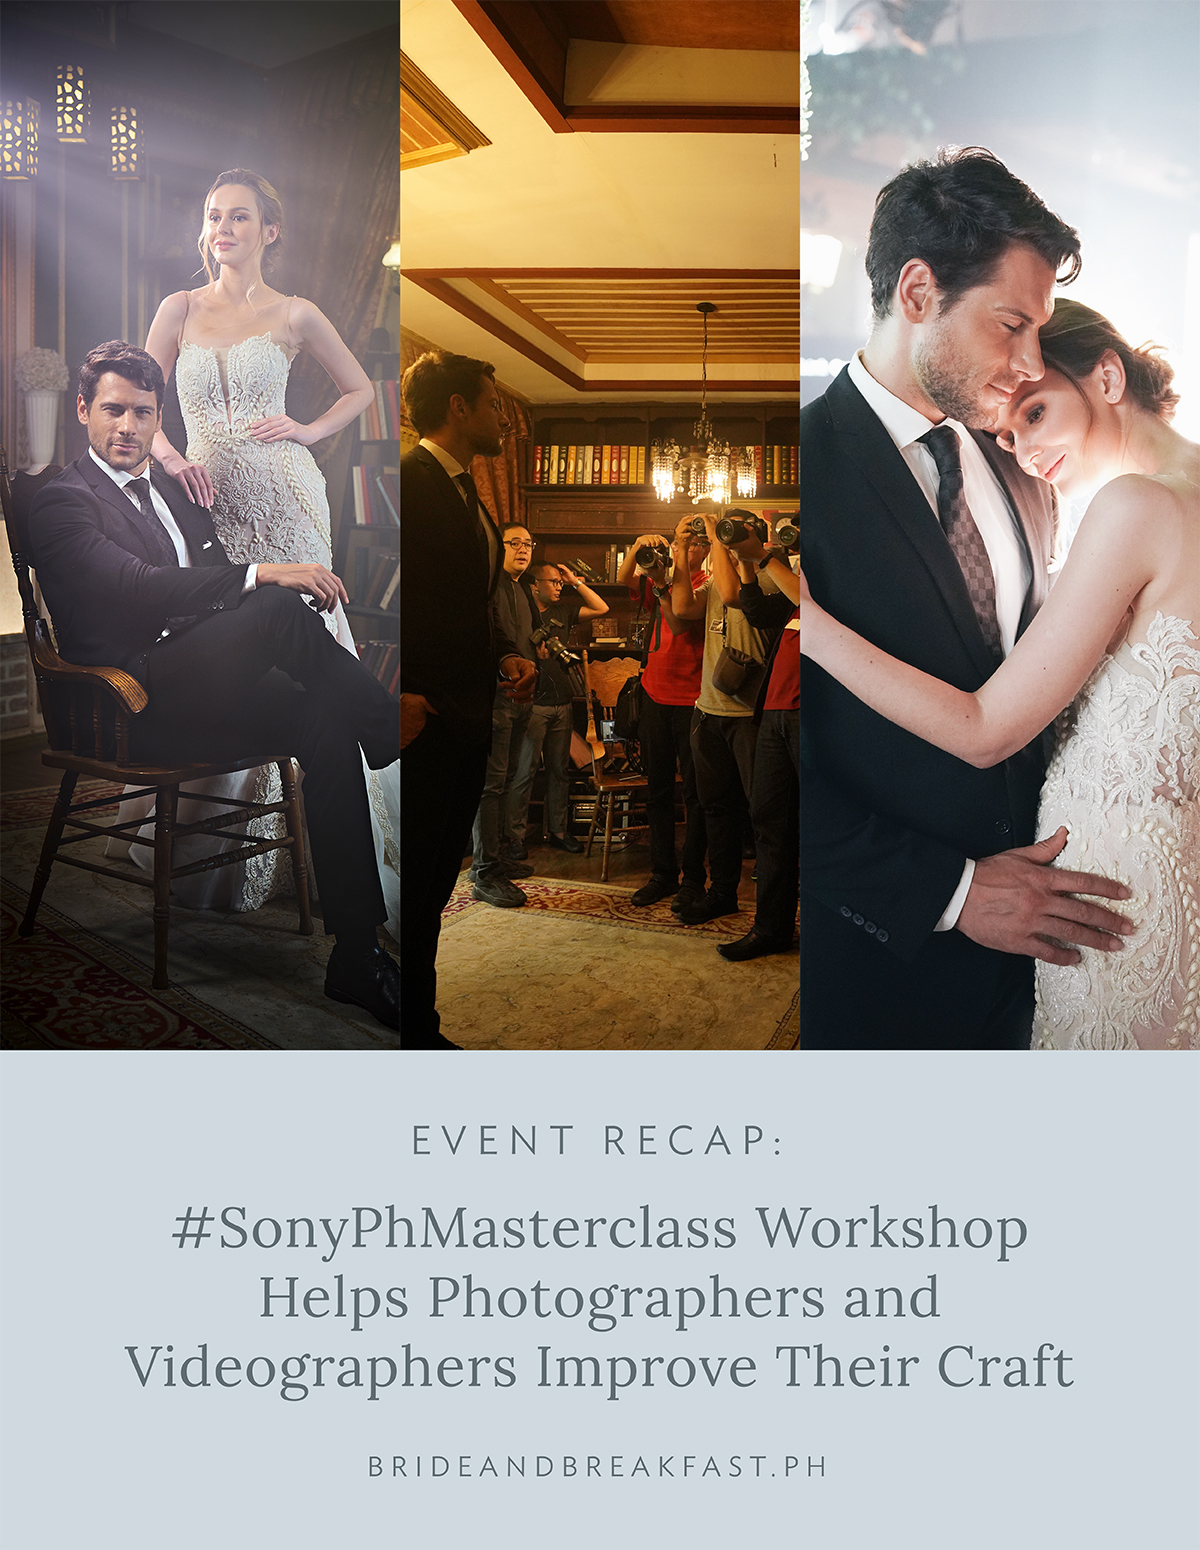 Event Recap: #SonyPhMasterclass Workshop Helps Photographers and Videographers Improve Their Craft